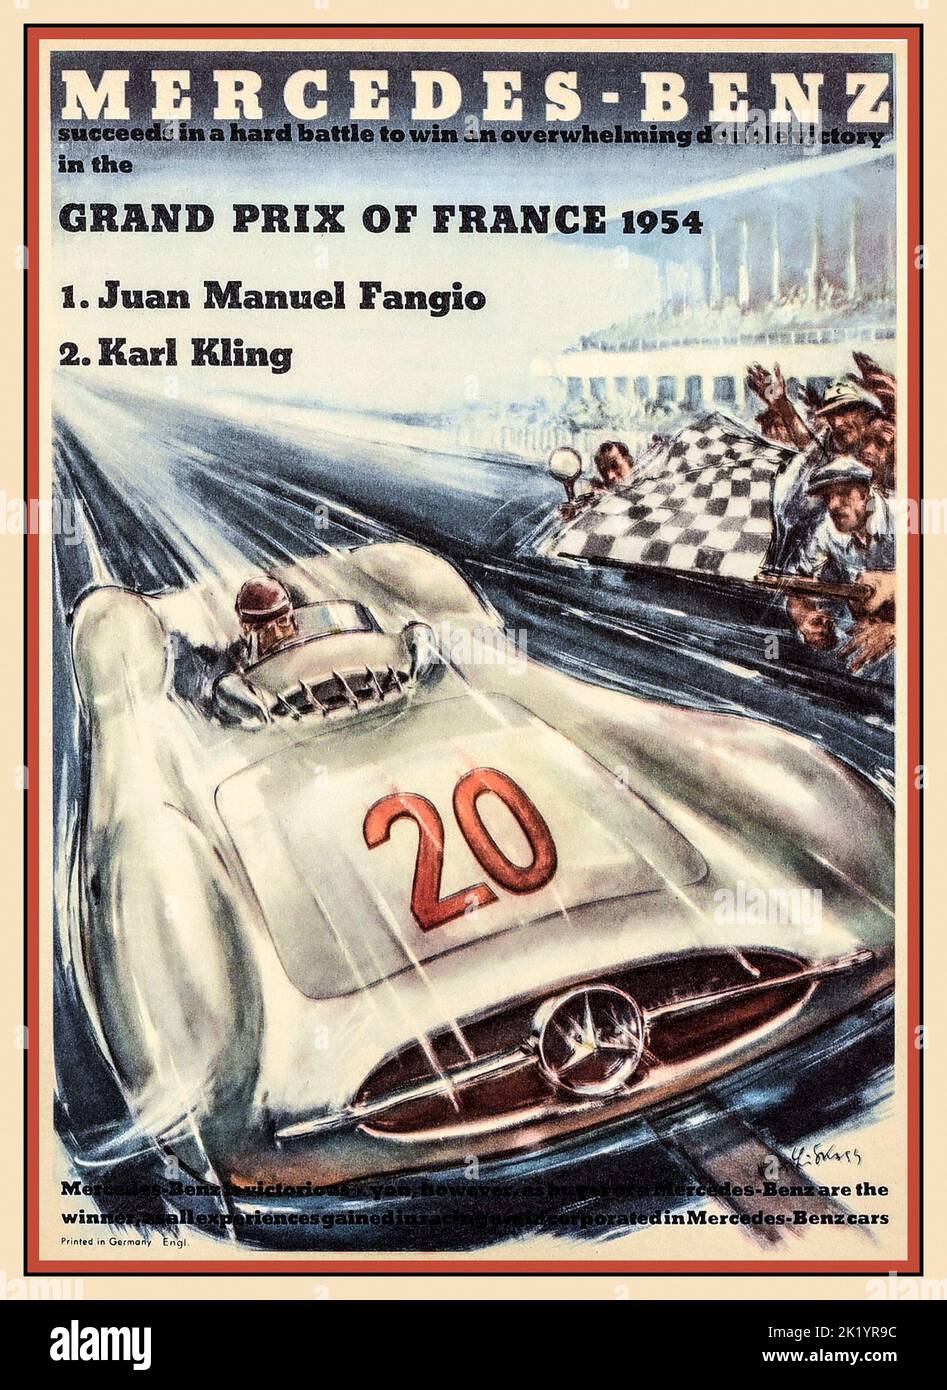 Mercedes-Benz Grand Prix of France 1954 Poster.  Winner Juan Manuel Fangio in a No 20 Mercedes W196 , The 1954 French Grand Prix was a Formula One motor race held at Reims on 4 July 1954, the same date as the 1954 Football World Cup Final. It was race 4 of 9 in the 1954 World Championship of Drivers. The 61-lap race was won by Mercedes driver Juan Manuel Fangio after he started from pole position. Second position was Karl Kling also driving a Mercedes. Reims France Stock Photo